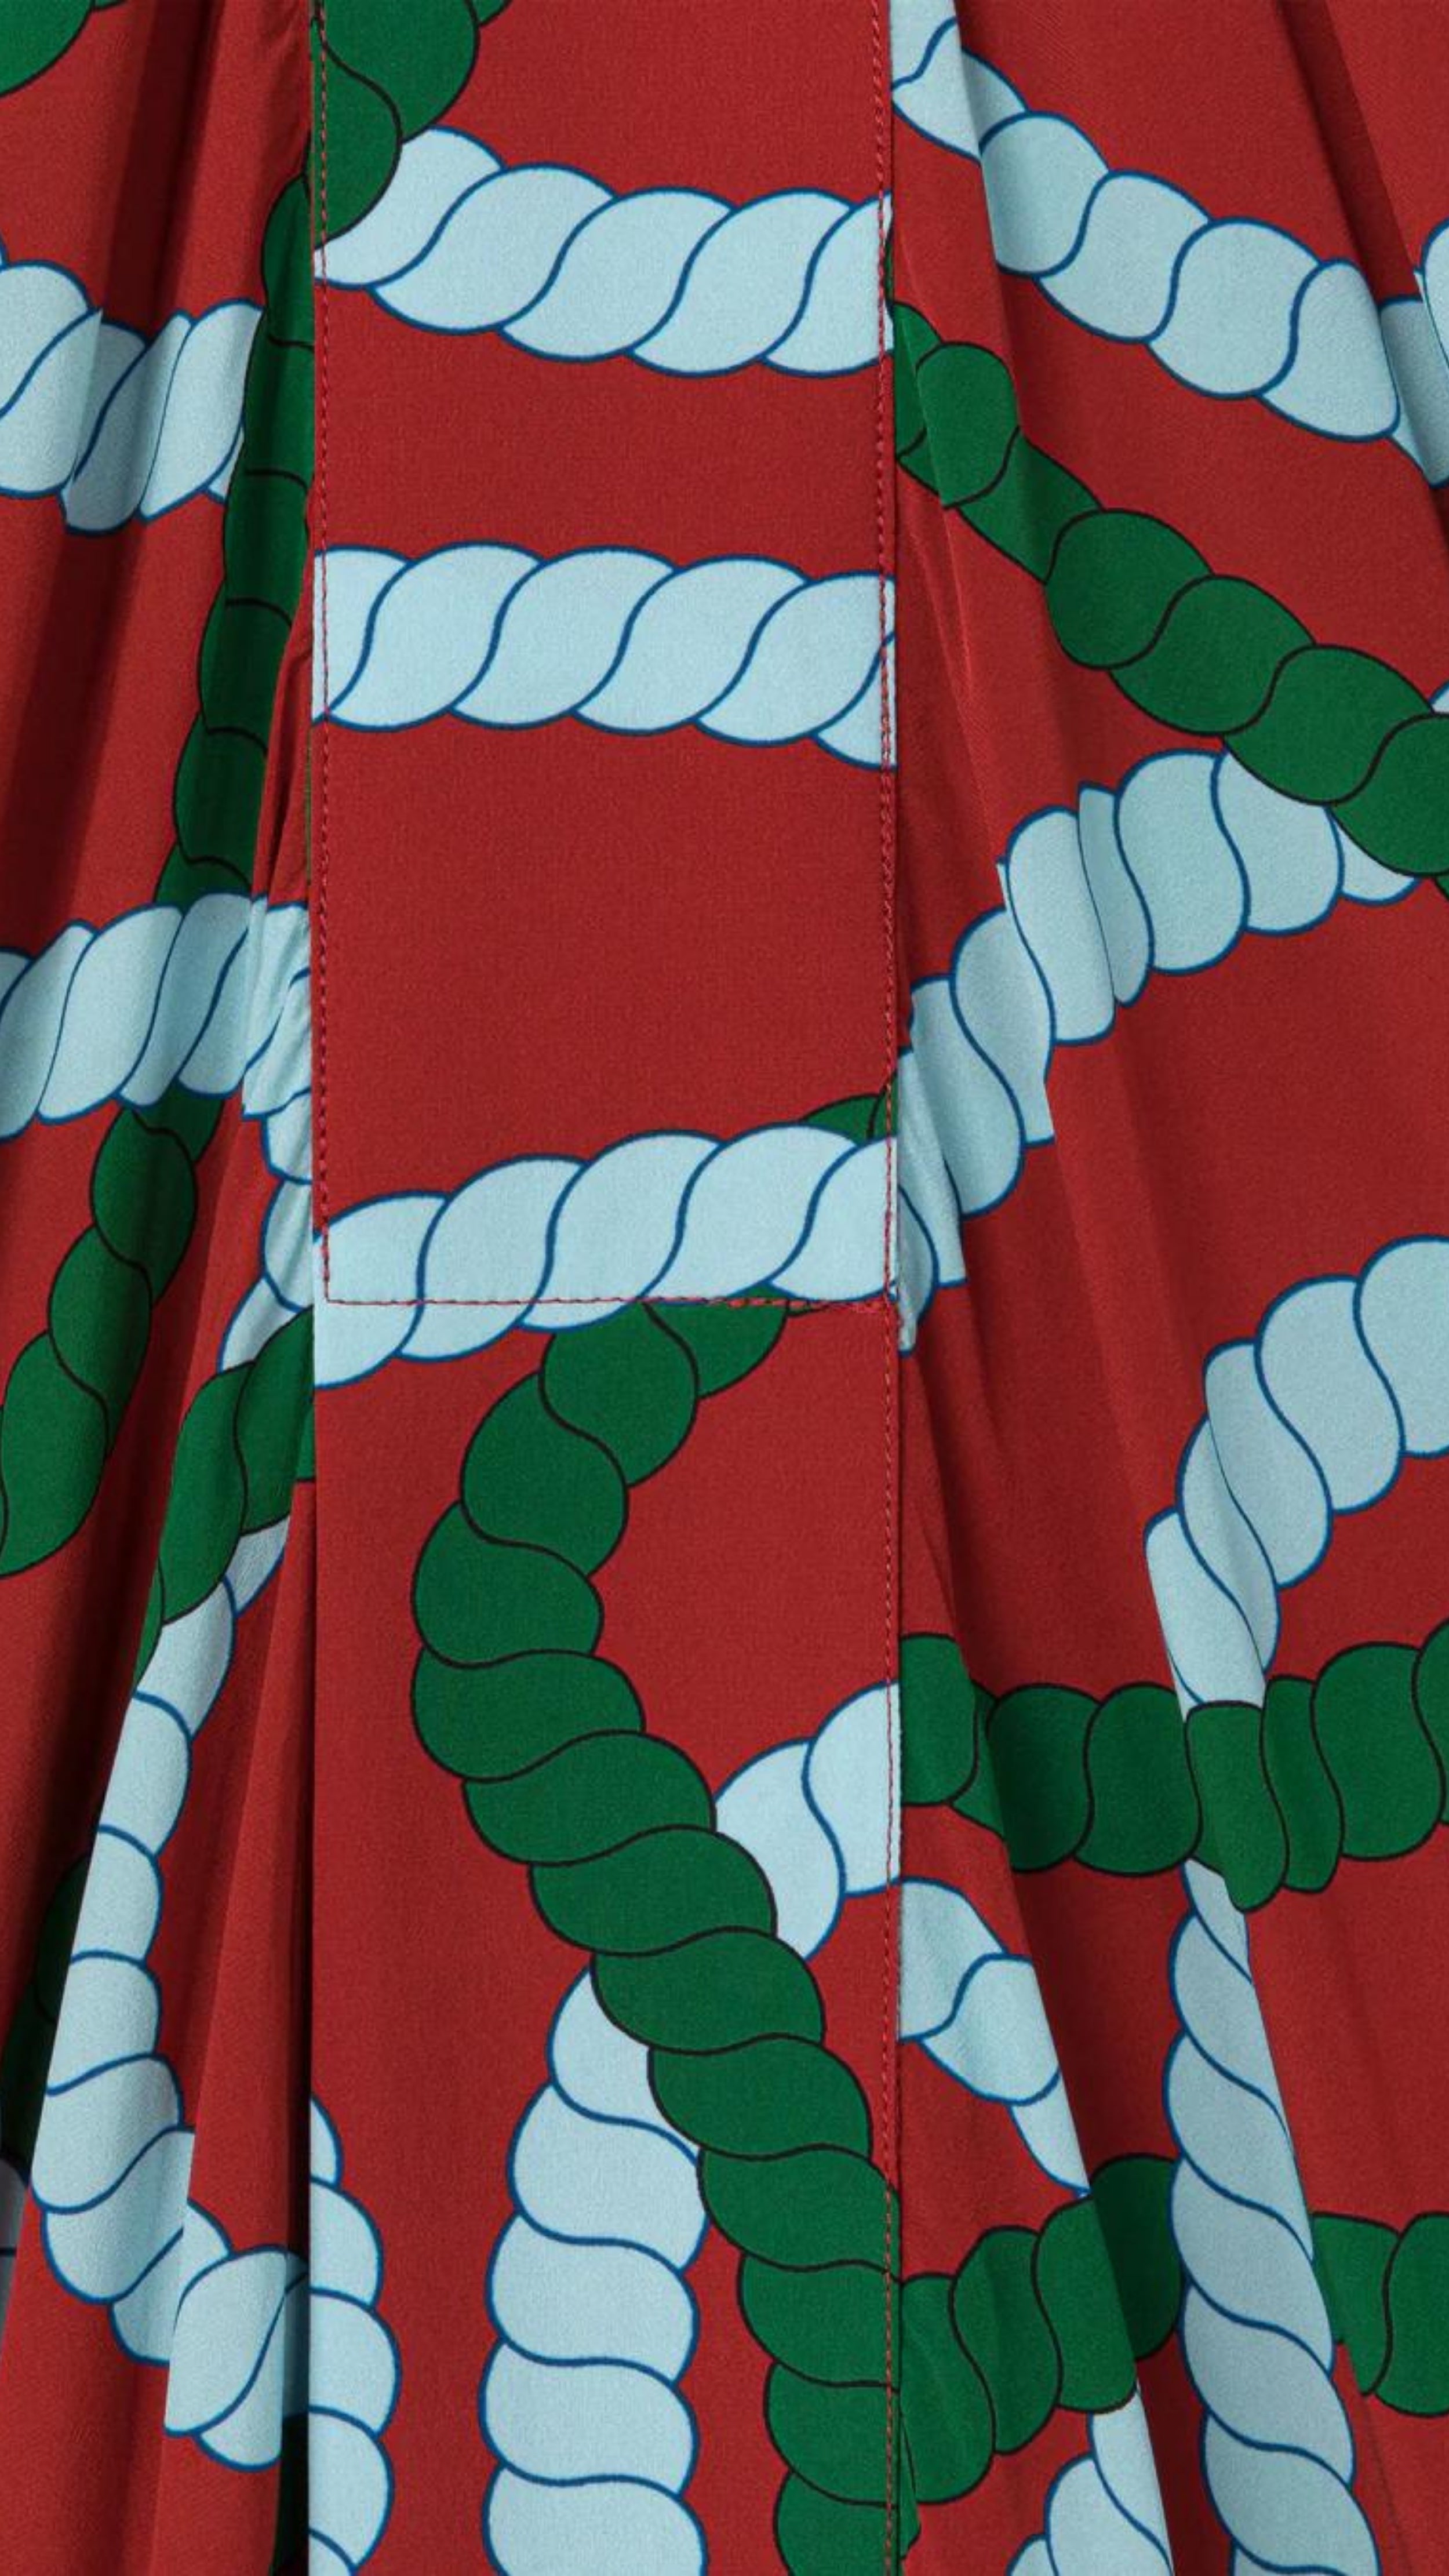 AZ Factory Colville Molly Molloy Lucinda Chambers, Printed Draped Midi Dress. Midi dress with long sleeves and a v cut neckline. It&#39;s a rust red with intertwining  rope pattern in green and sky blue. Detail of pattern and material.